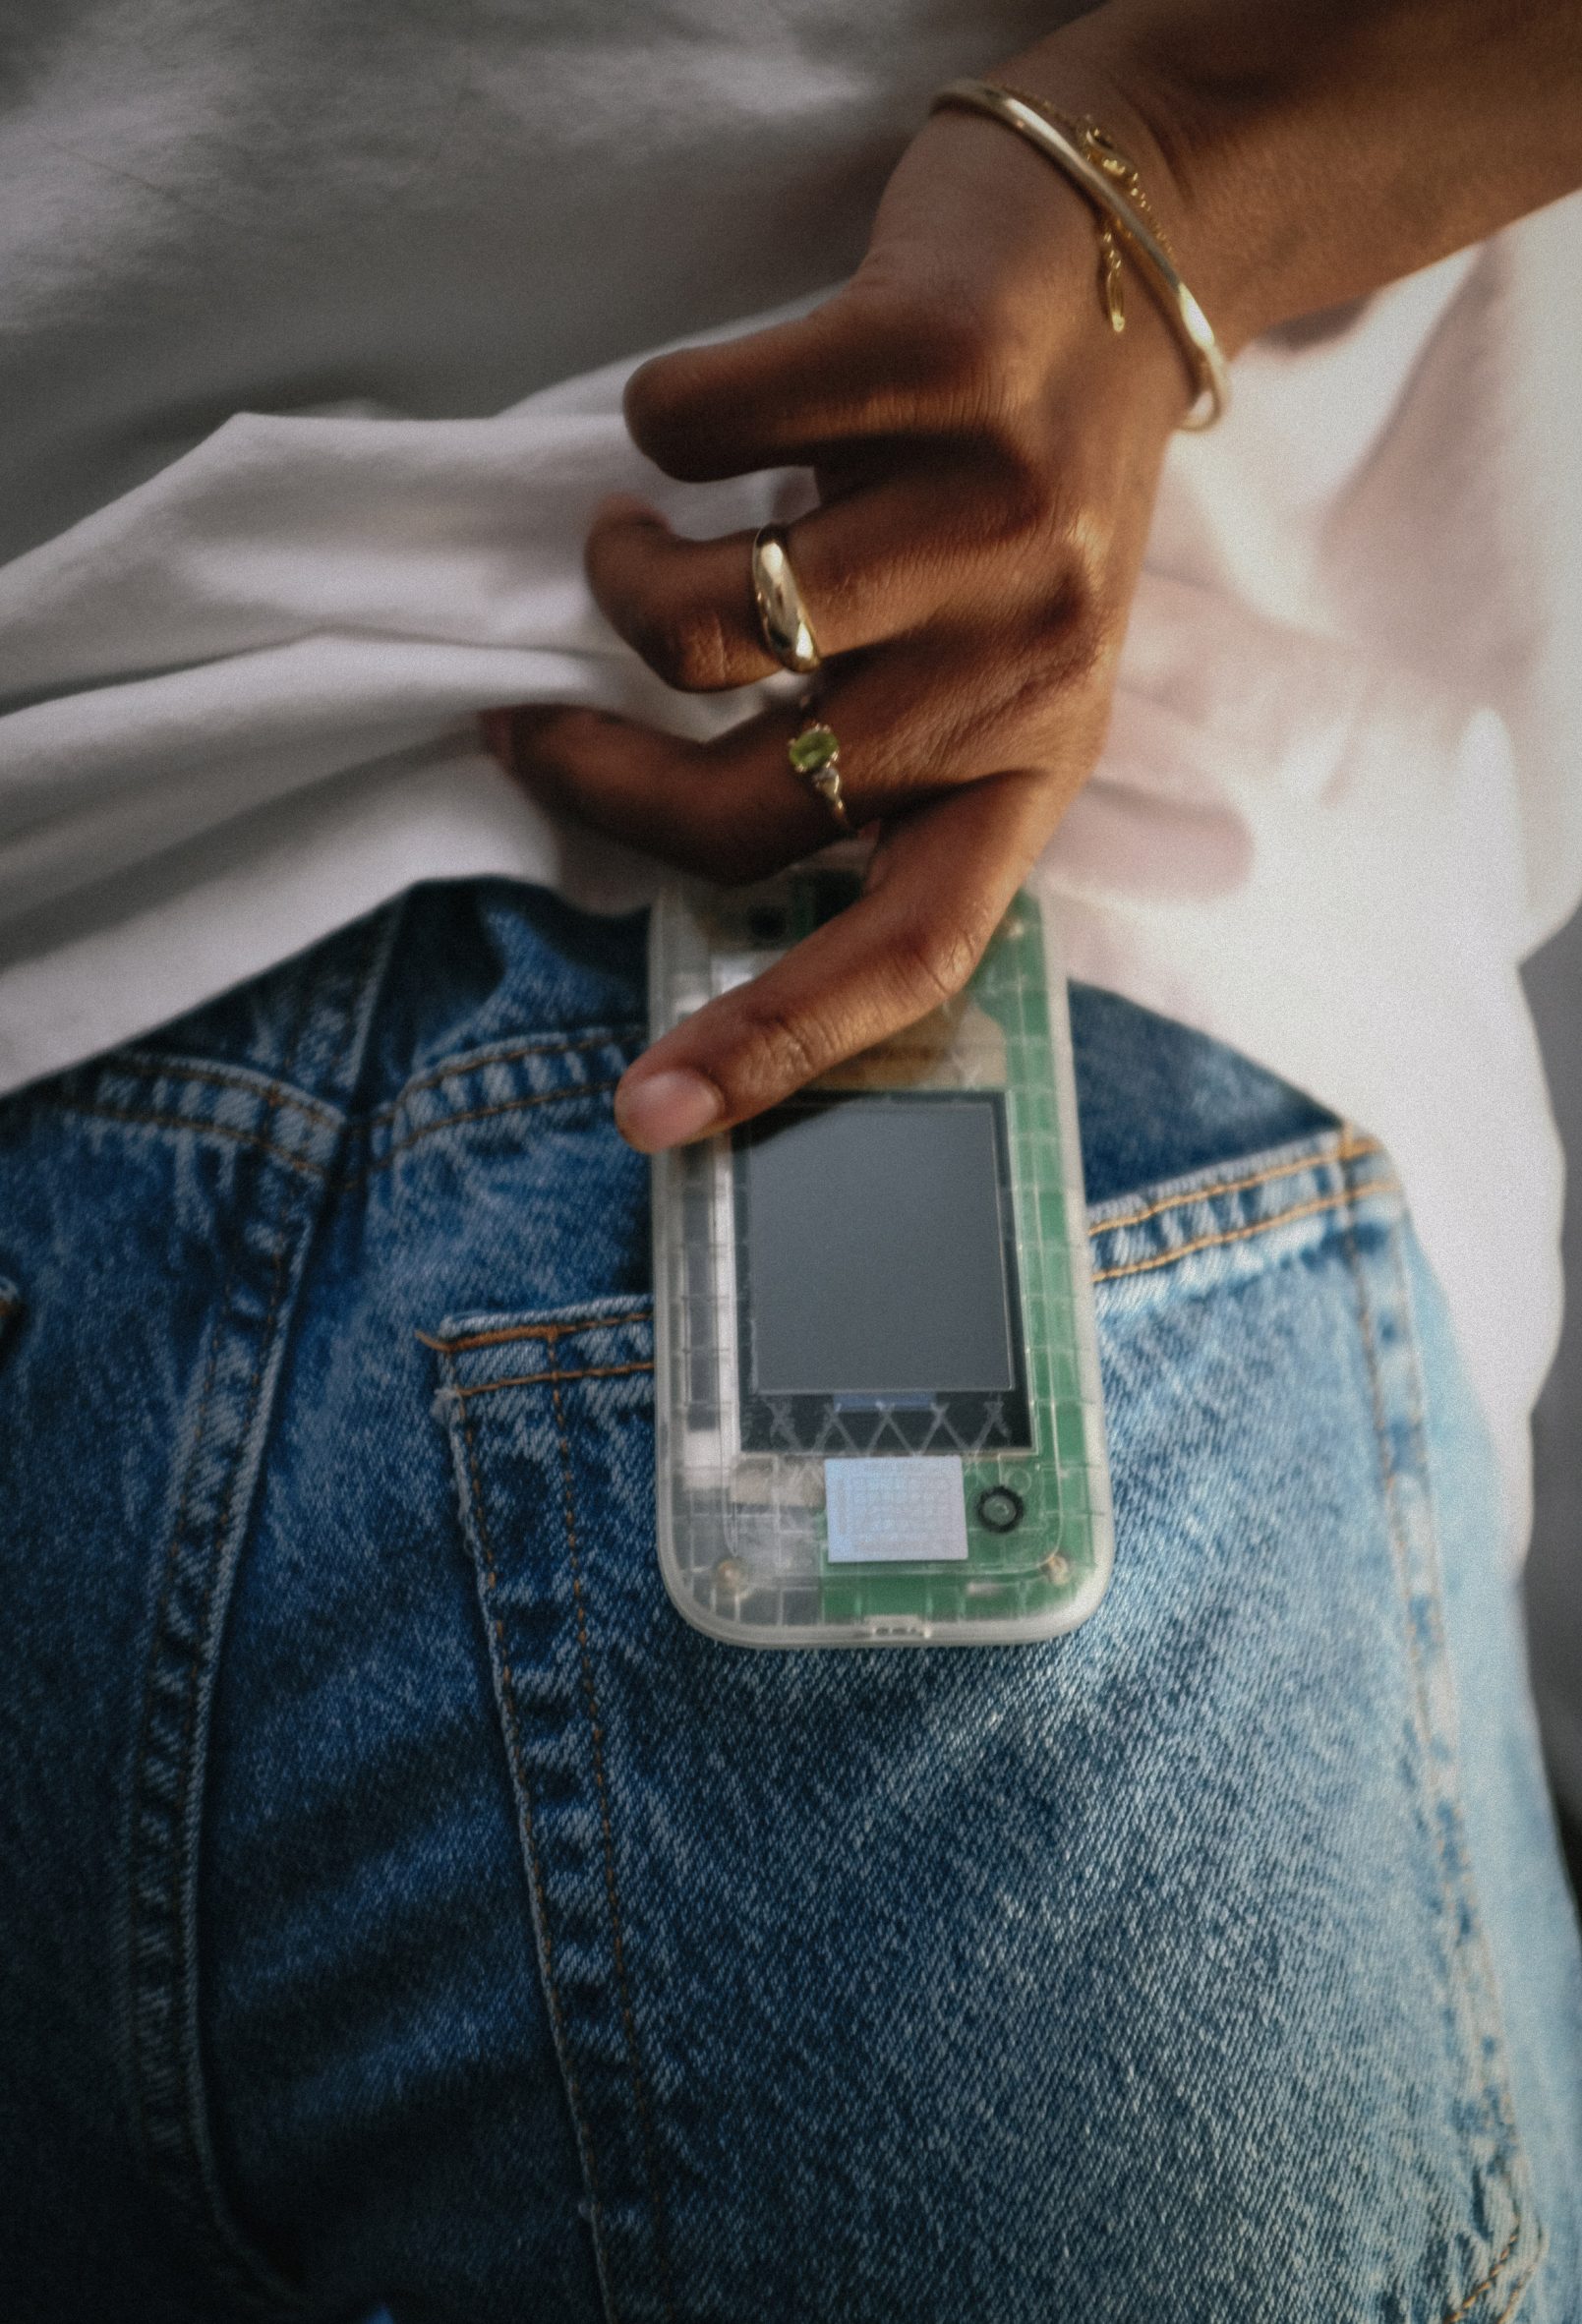 The Boring Phone in a jean pocket by Heineken and Bodega